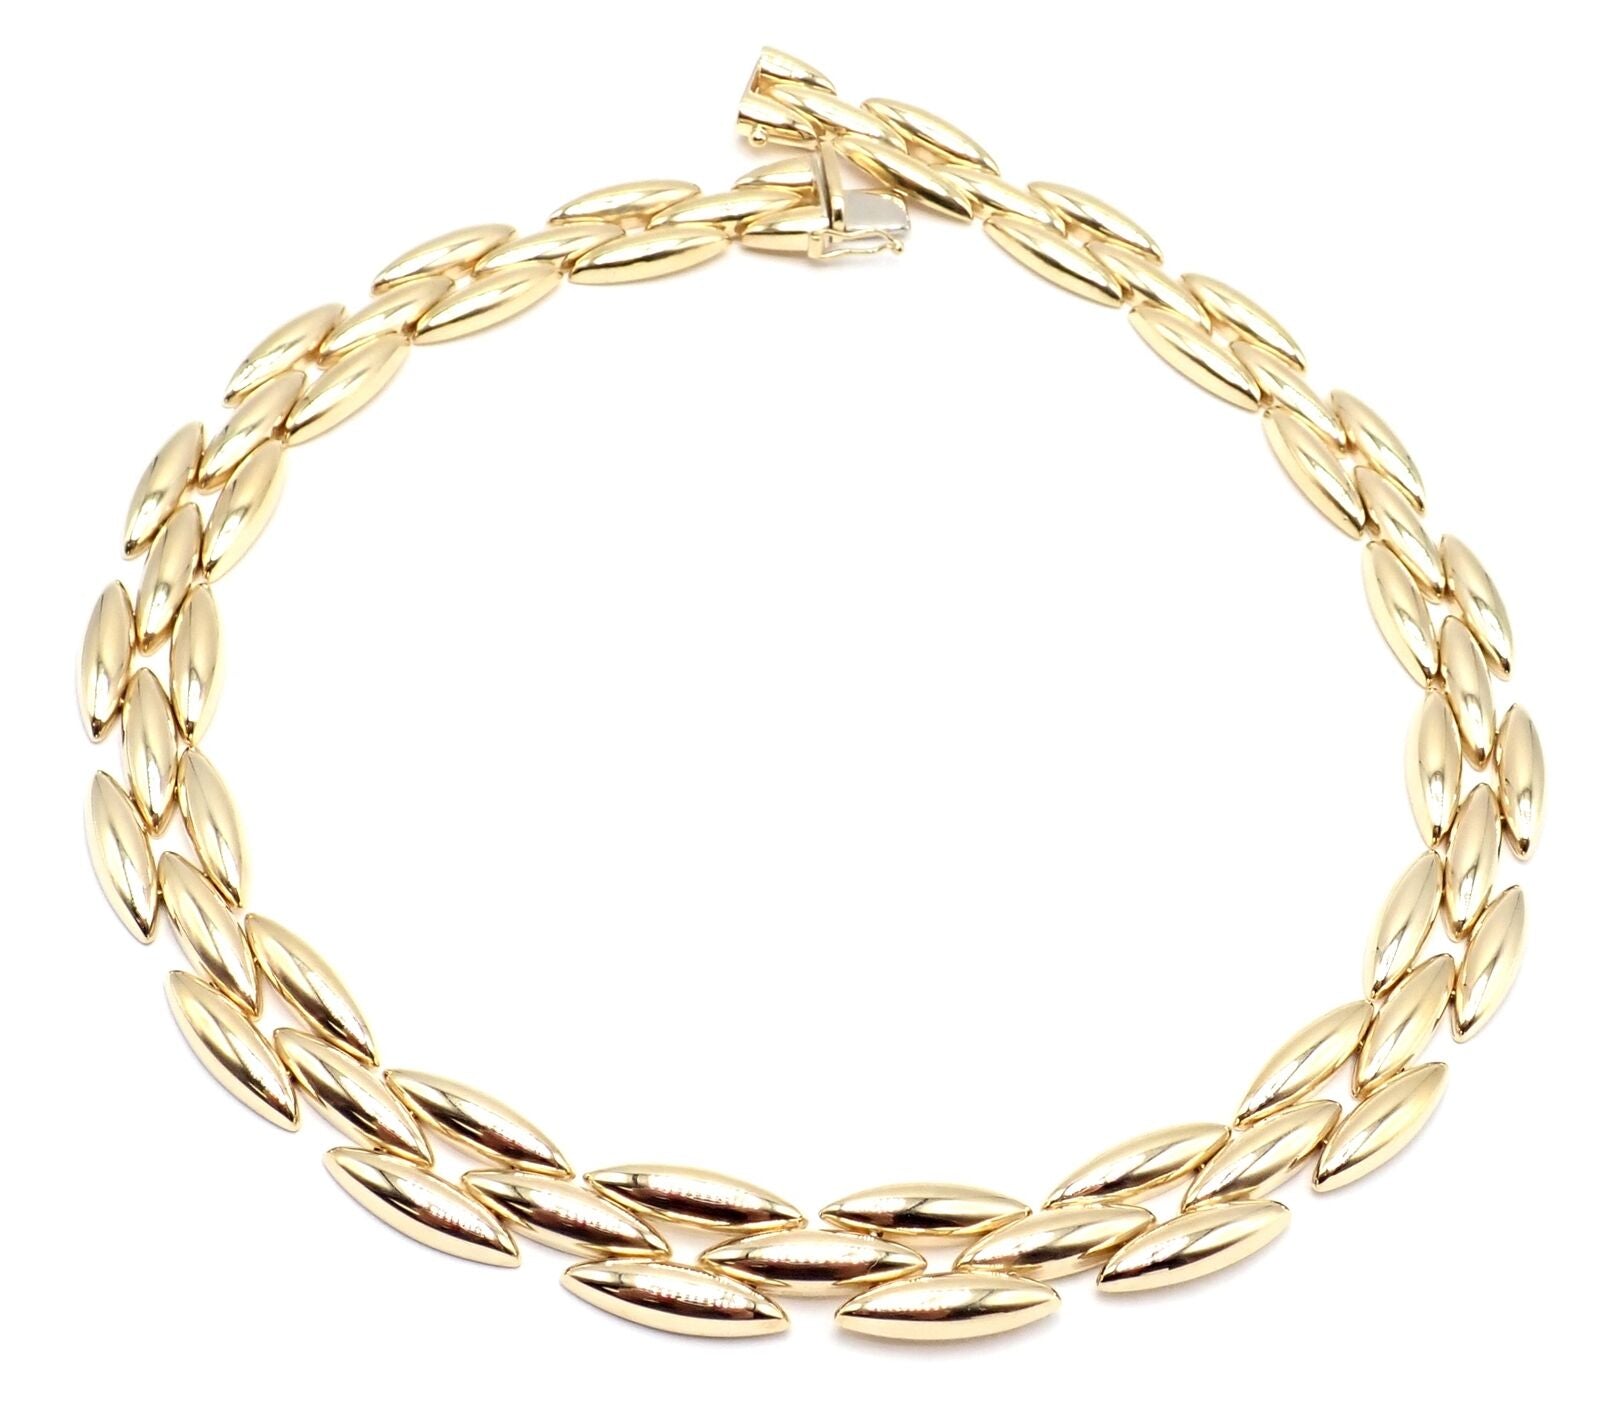 Authentic! Cartier Three-Row 18k Yellow Gold Gentiane Rice Link